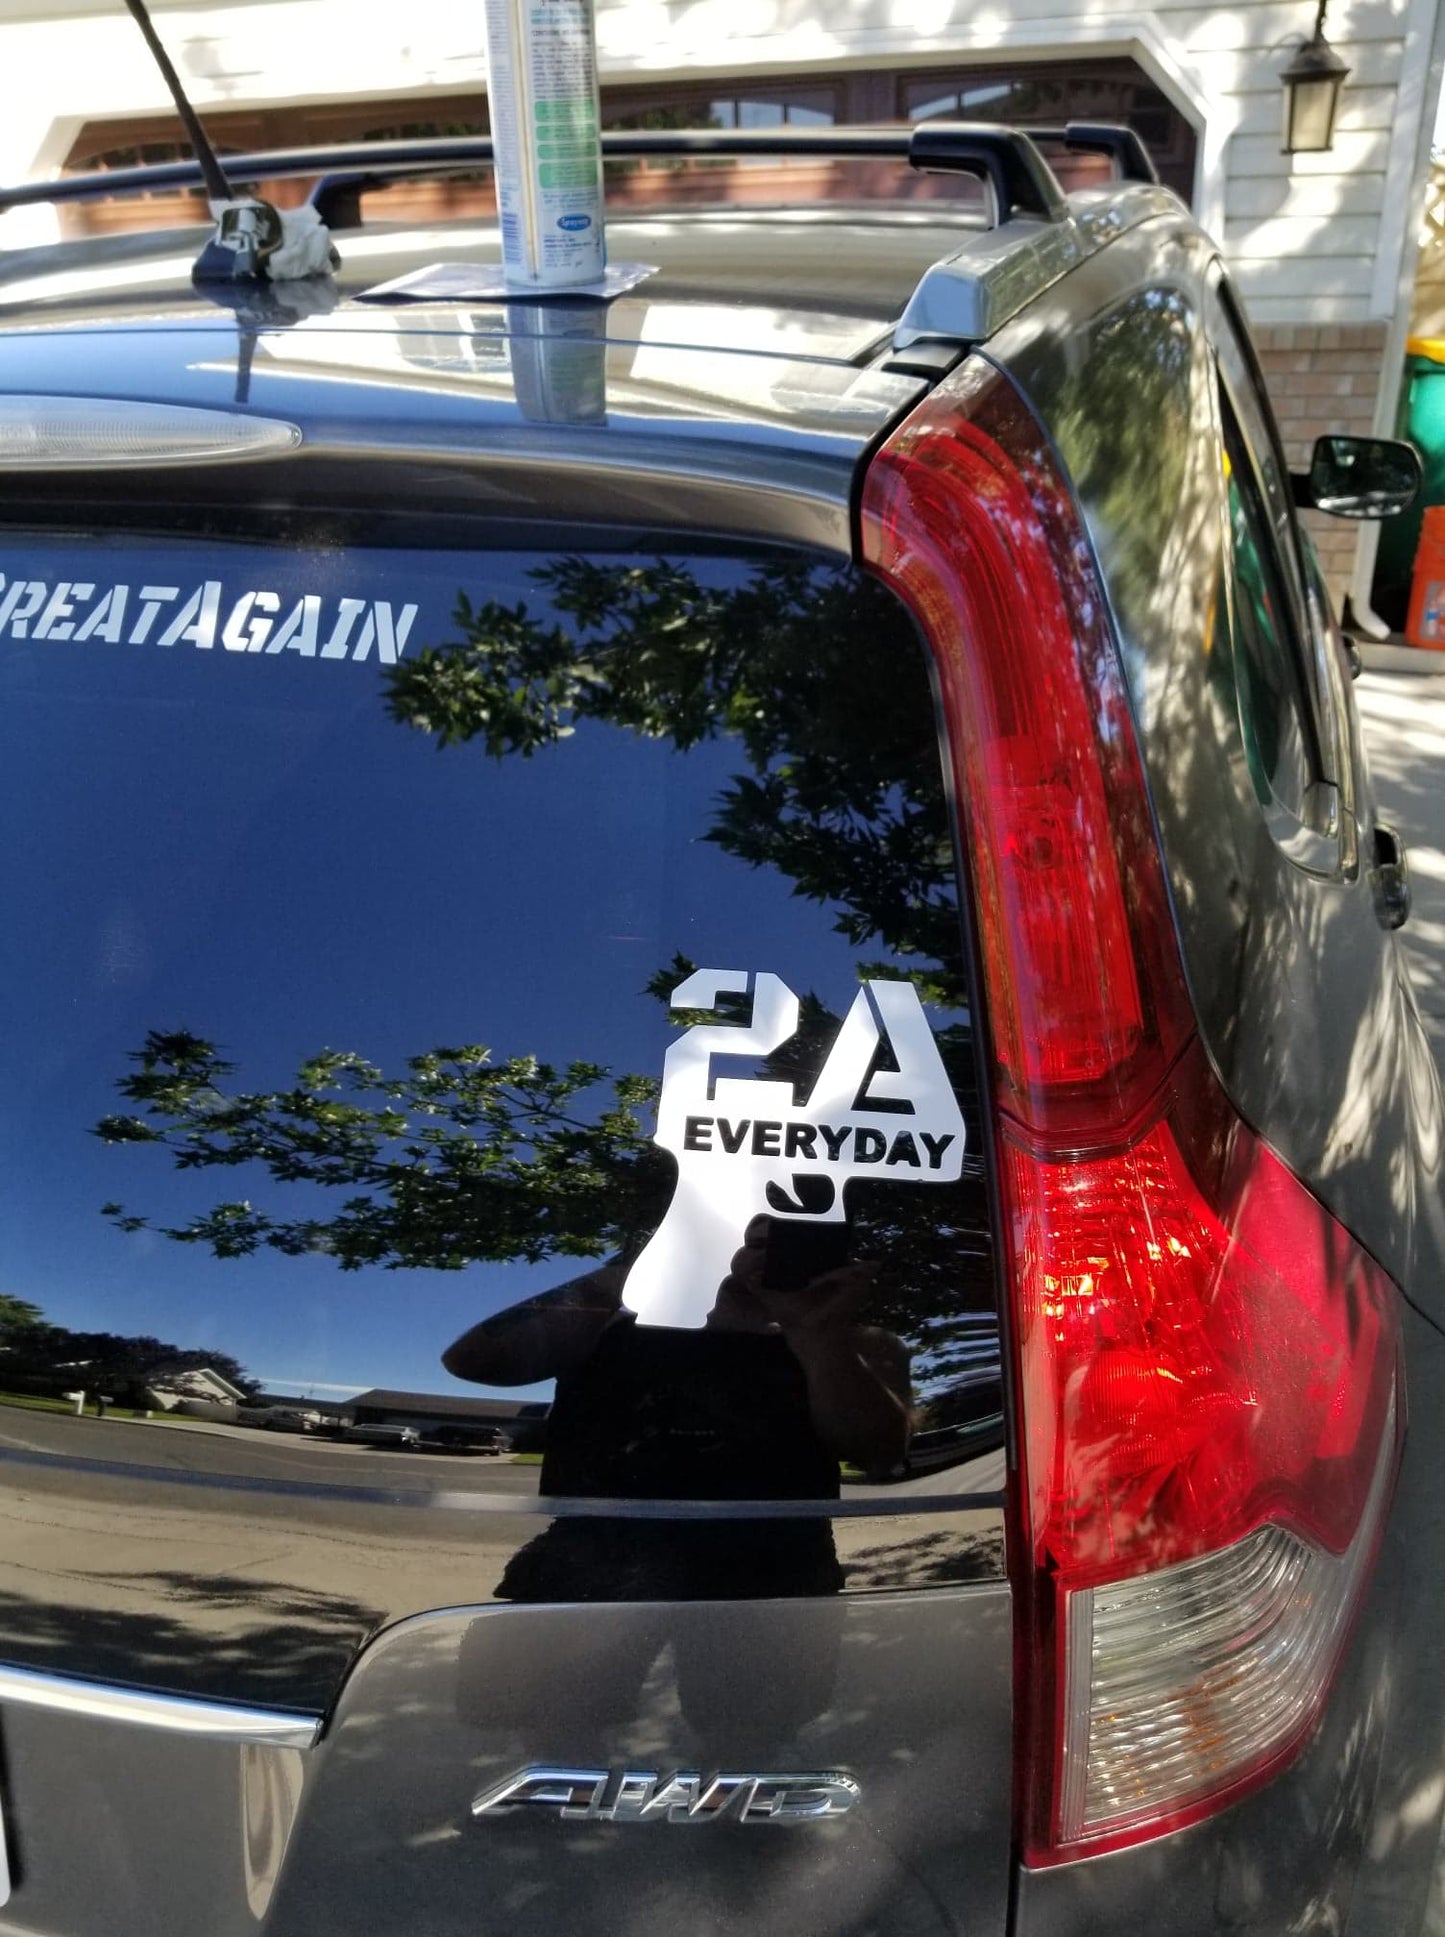 2A Everyday Decal